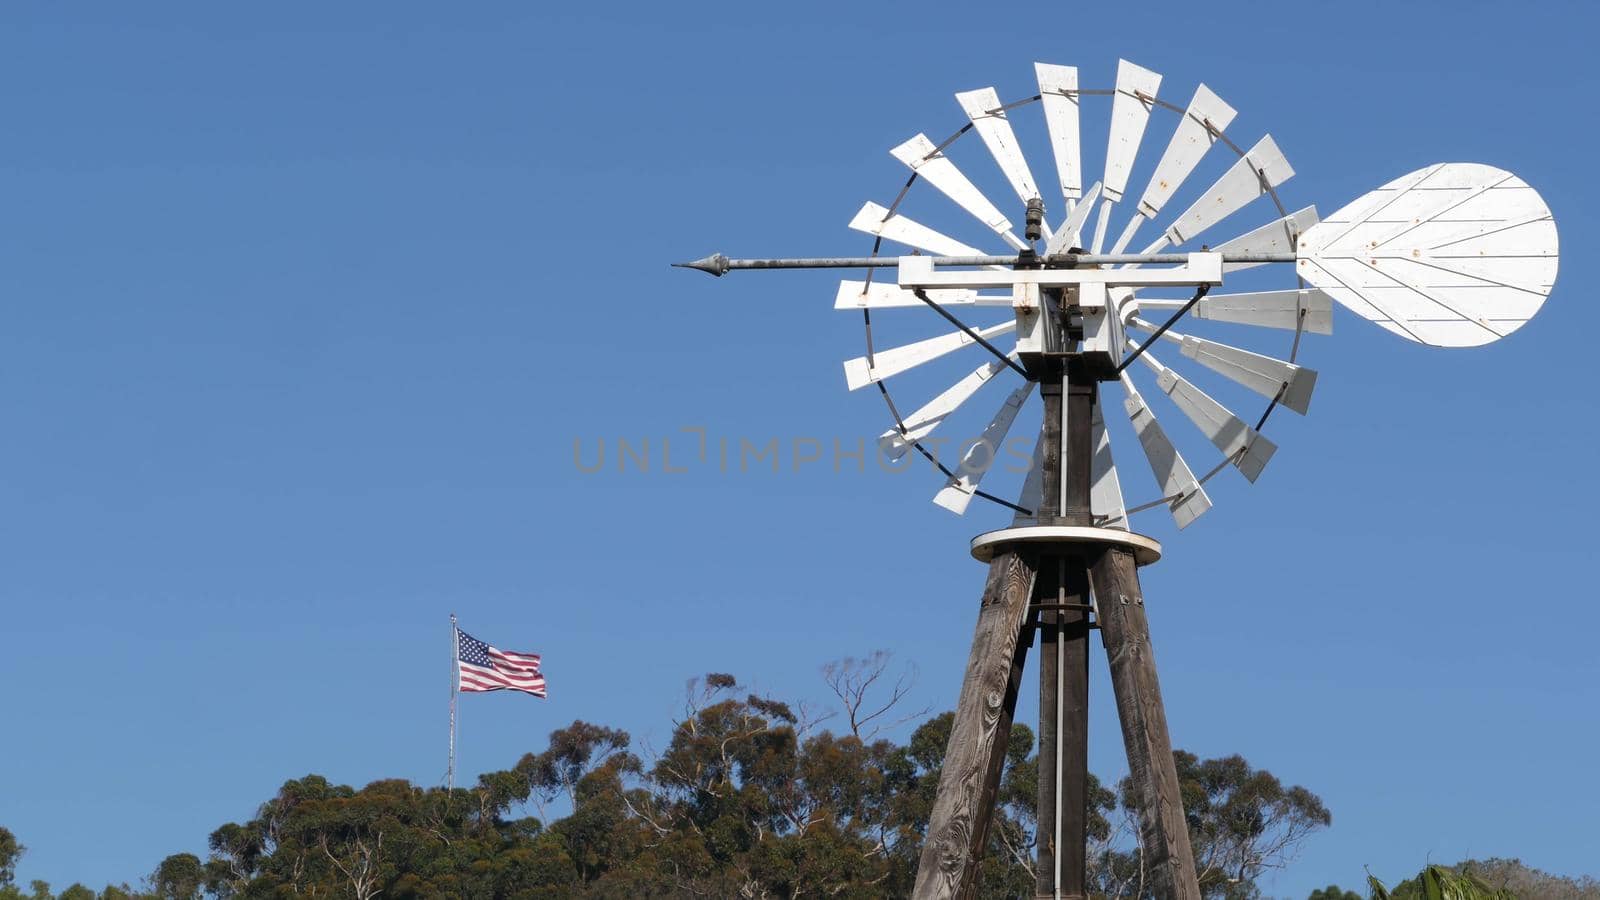 Classic retro windmill, bladed rotor and USA flag against blue sky. Vintage water pump wind turbine, power generator on livestock ranch or agricultural farm. Rural symbol of wild west, rustic suburb.